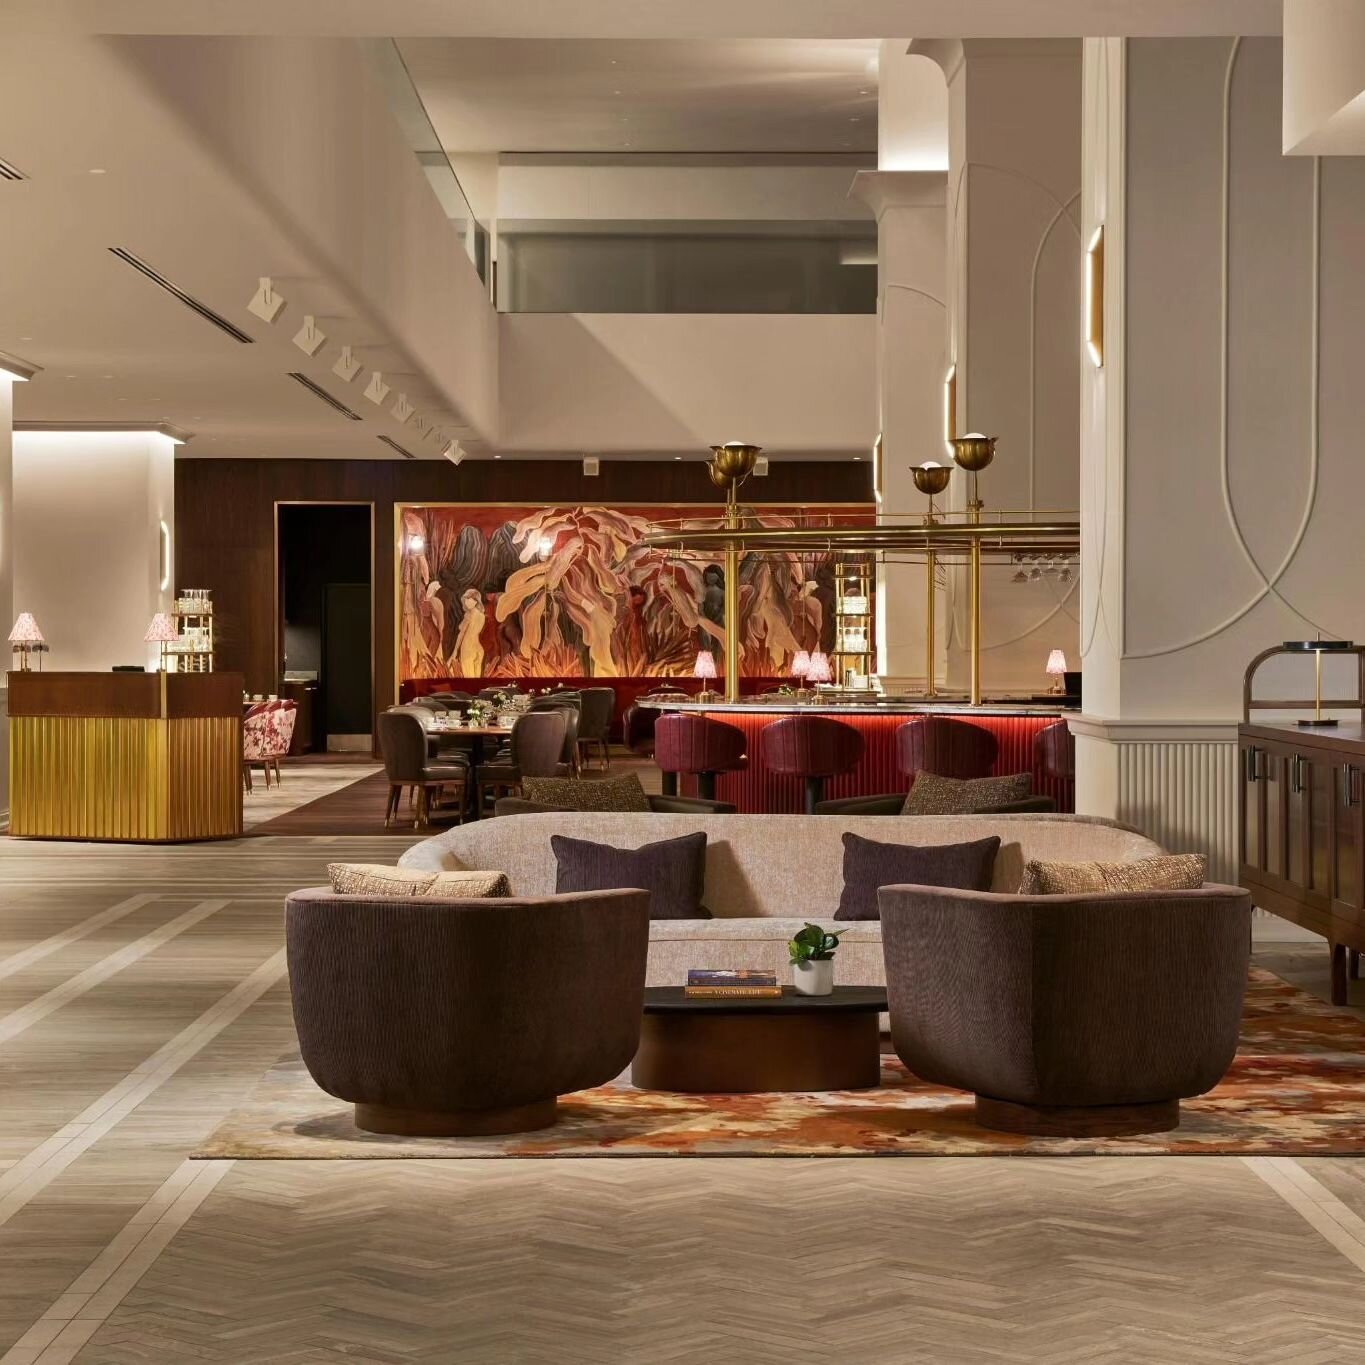 Hilton Toronto Unveils Renovated Accommodations and Introduces All‑New Lobby Bar and Brasserie, Frenchy

&quot;Upon entering the hotel, guests are greeted by a transformed lobby, exuding an engaging ambiance and a sense of closeness. Realized by reno